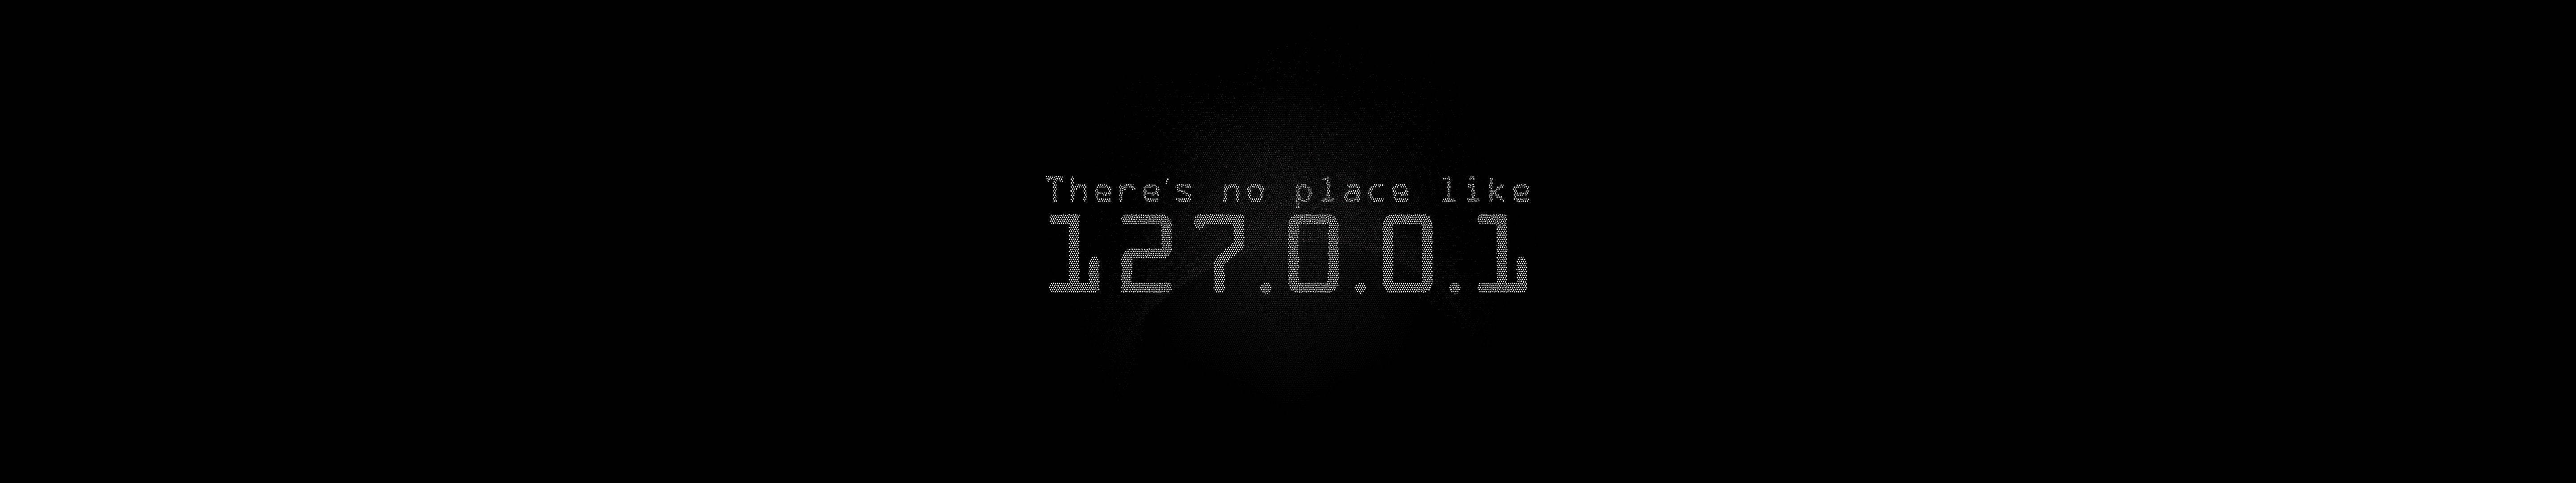 There's No Place Like 127.0.0.1 Meme